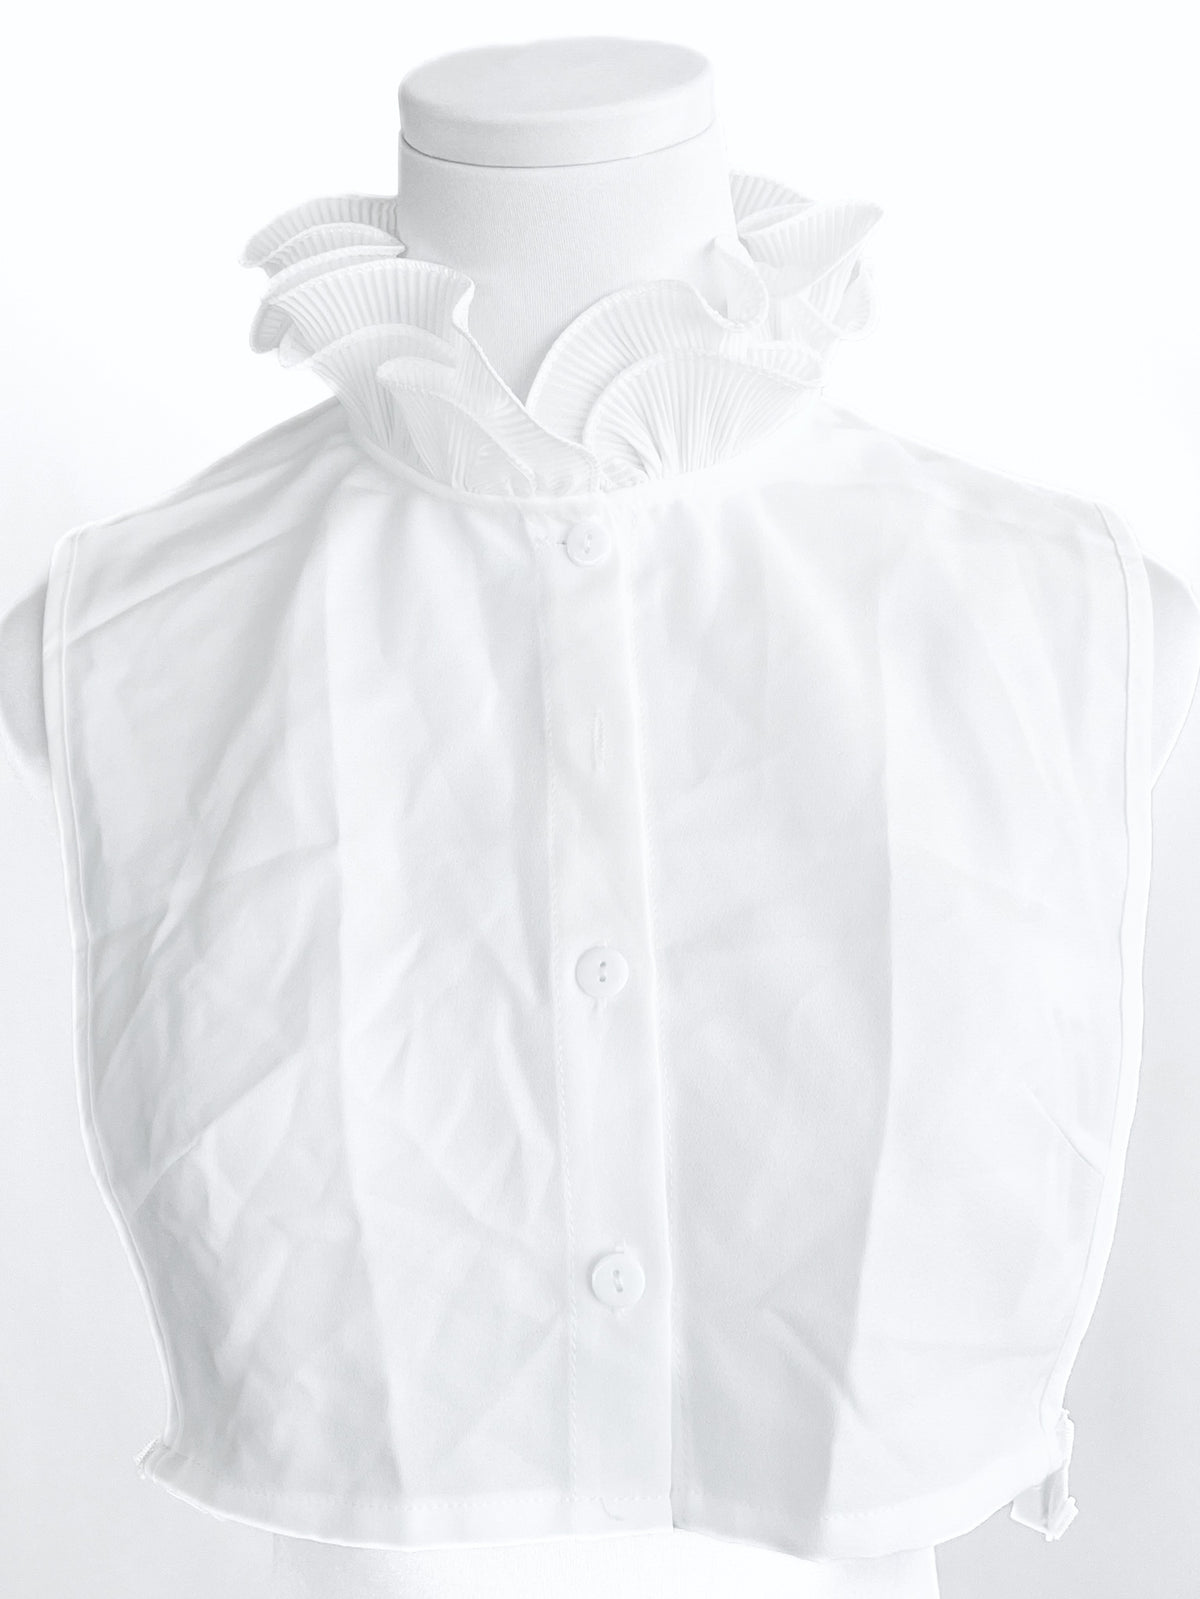 Frilled Faux-llar - White-260 Other Accessories-Darling-Coastal Bloom Boutique, find the trendiest versions of the popular styles and looks Located in Indialantic, FL